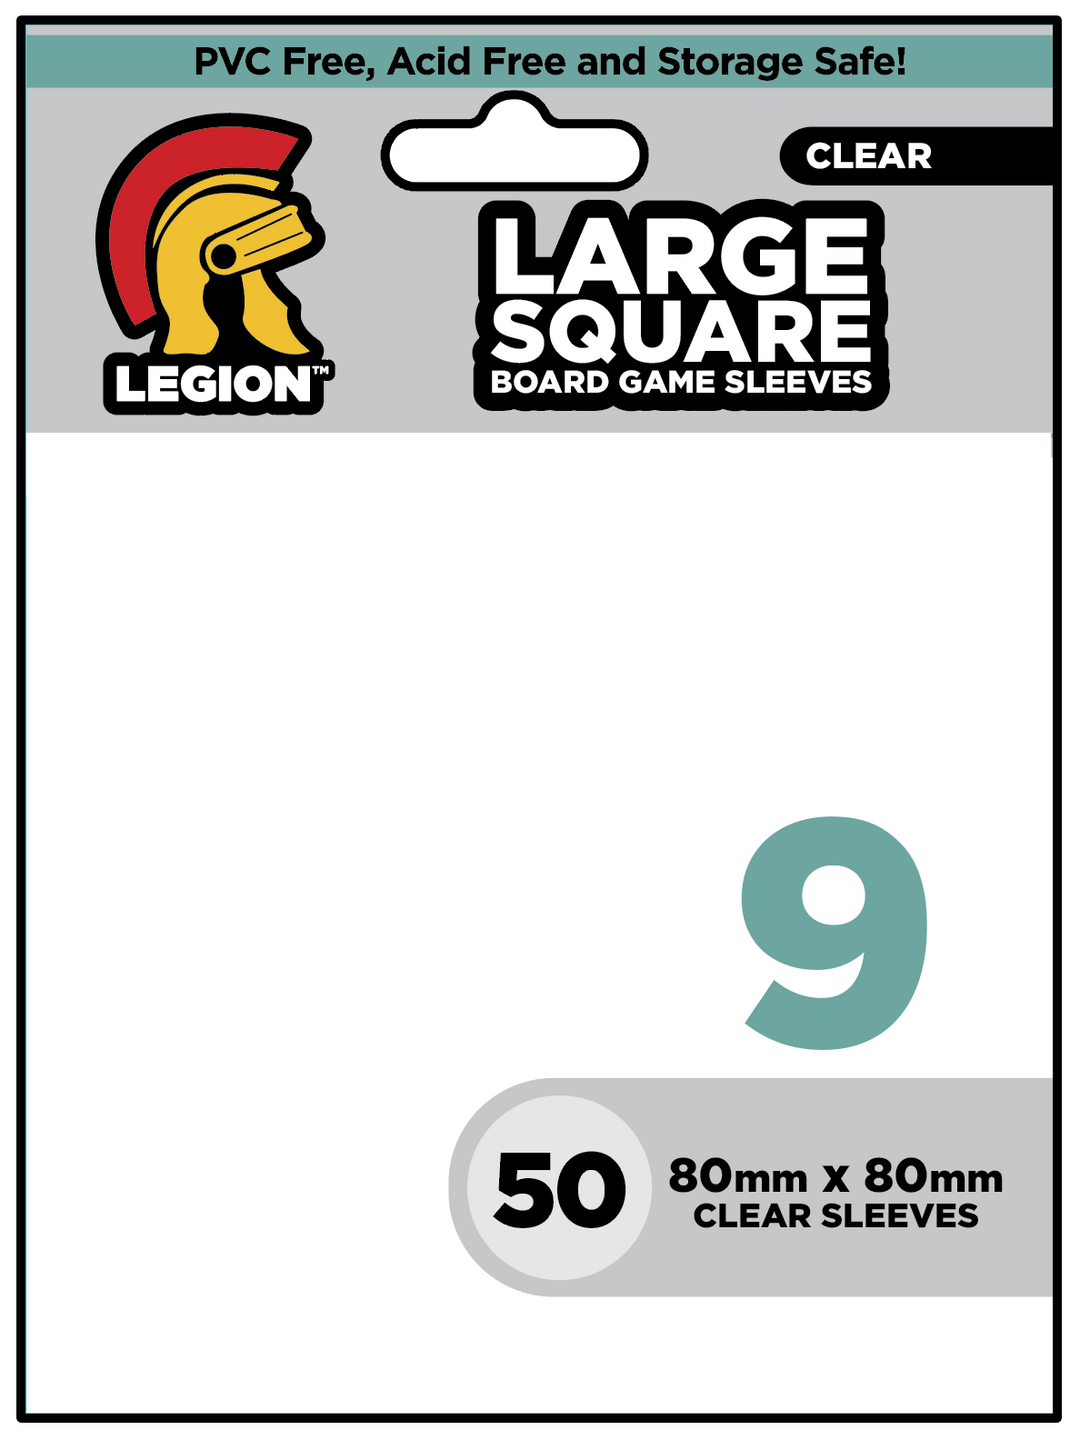 Legion Board Game Sleeves for use with the board game Card Sleeves, sold at the BoardGameGeek Store